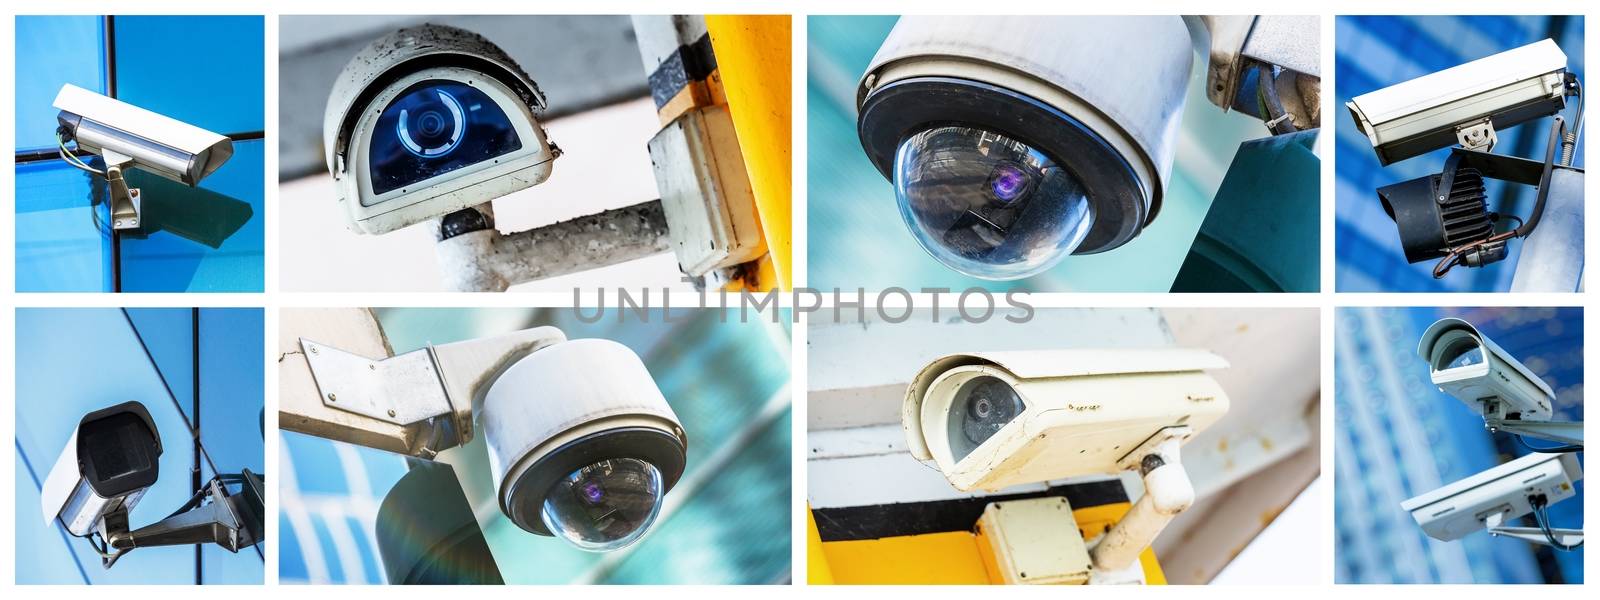 Panoramic collage of security CCTV camera or surveillance system by pixinoo